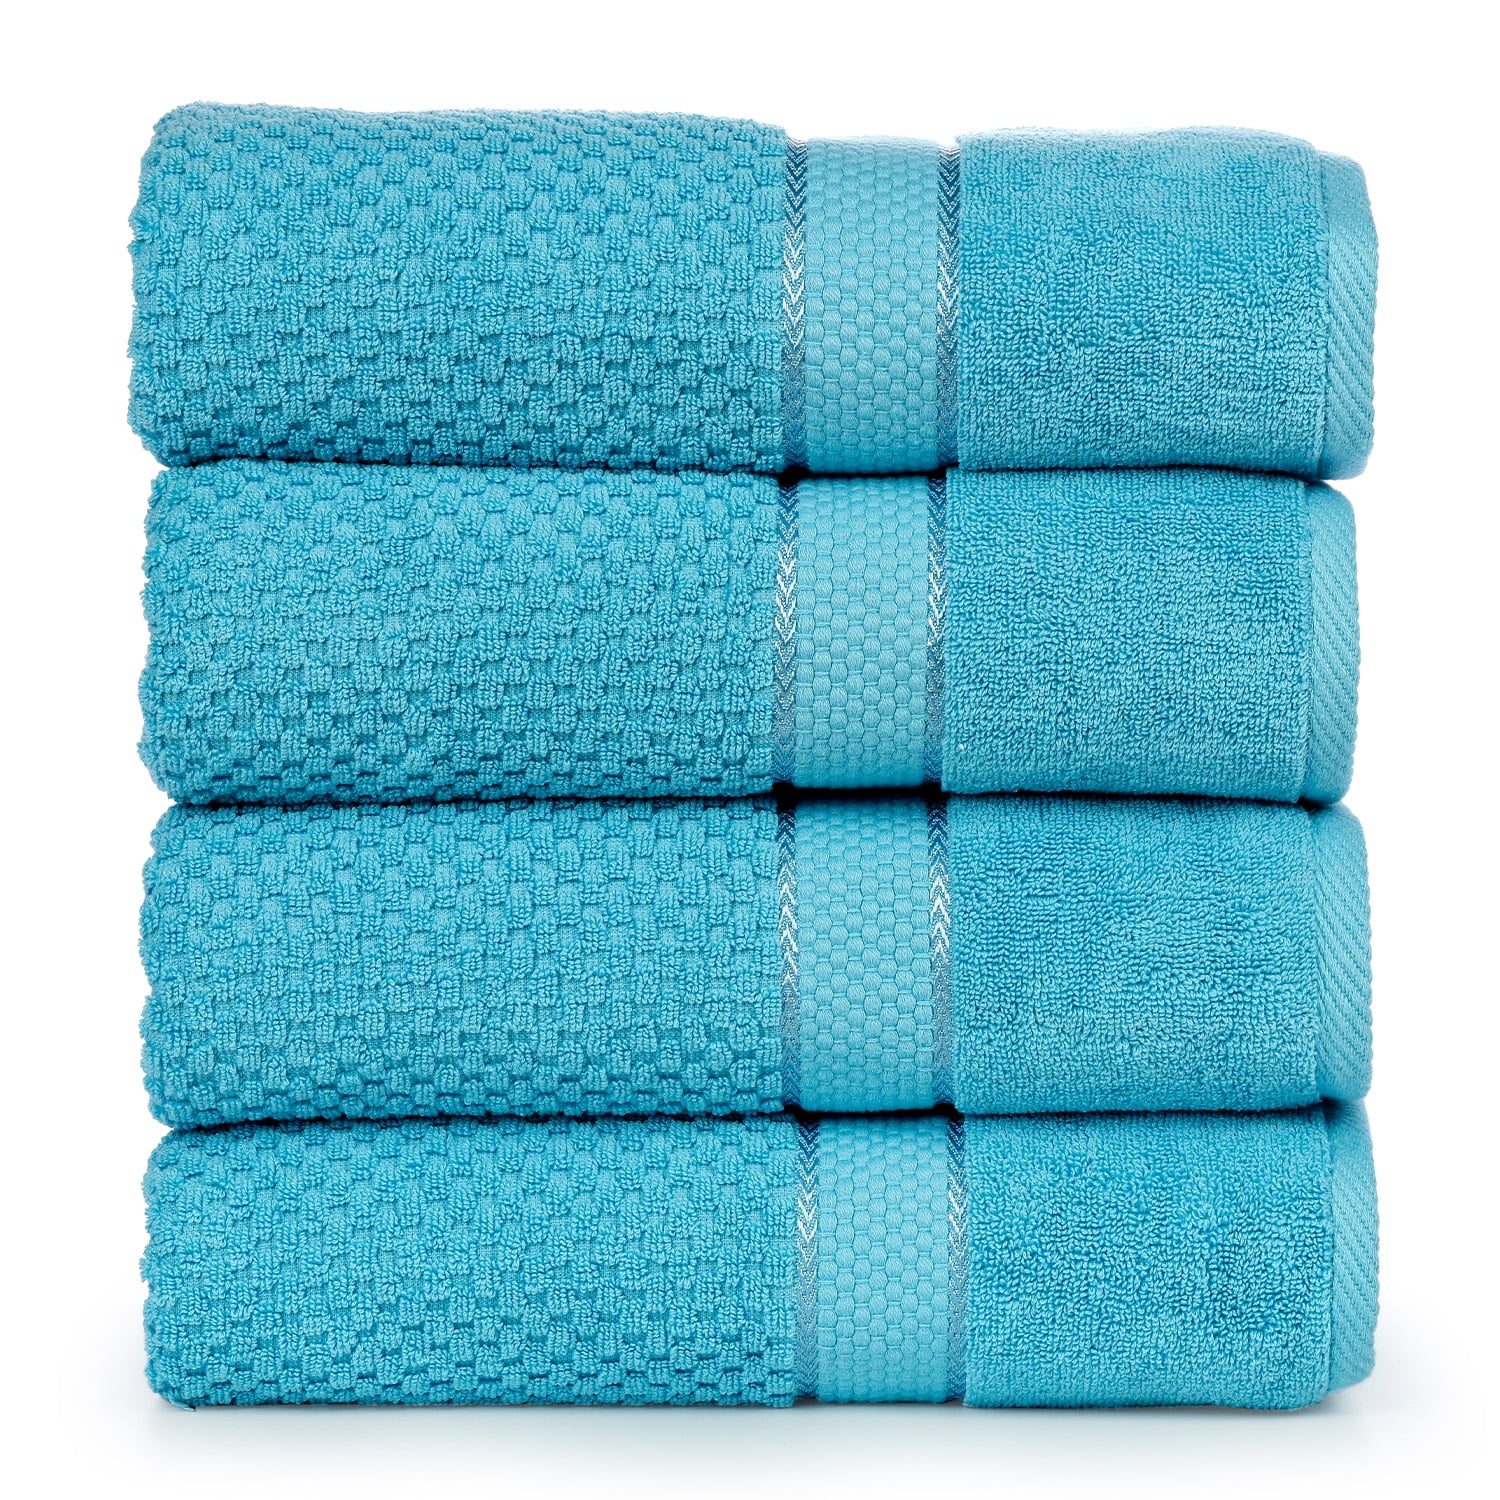 Ugg 21259 Pasha Cotton 2-Piece Hand Towel Soft Fluffy Luxury Highly Absorbent Spa-like Hotel Luxurious Machine Washable Towels, Hand 28 x 16-Inch